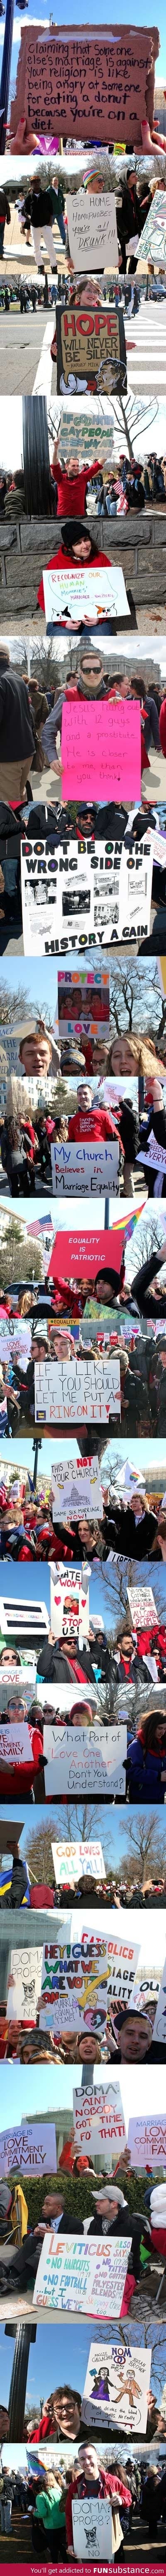 Best signs against anti-gay marriage laws